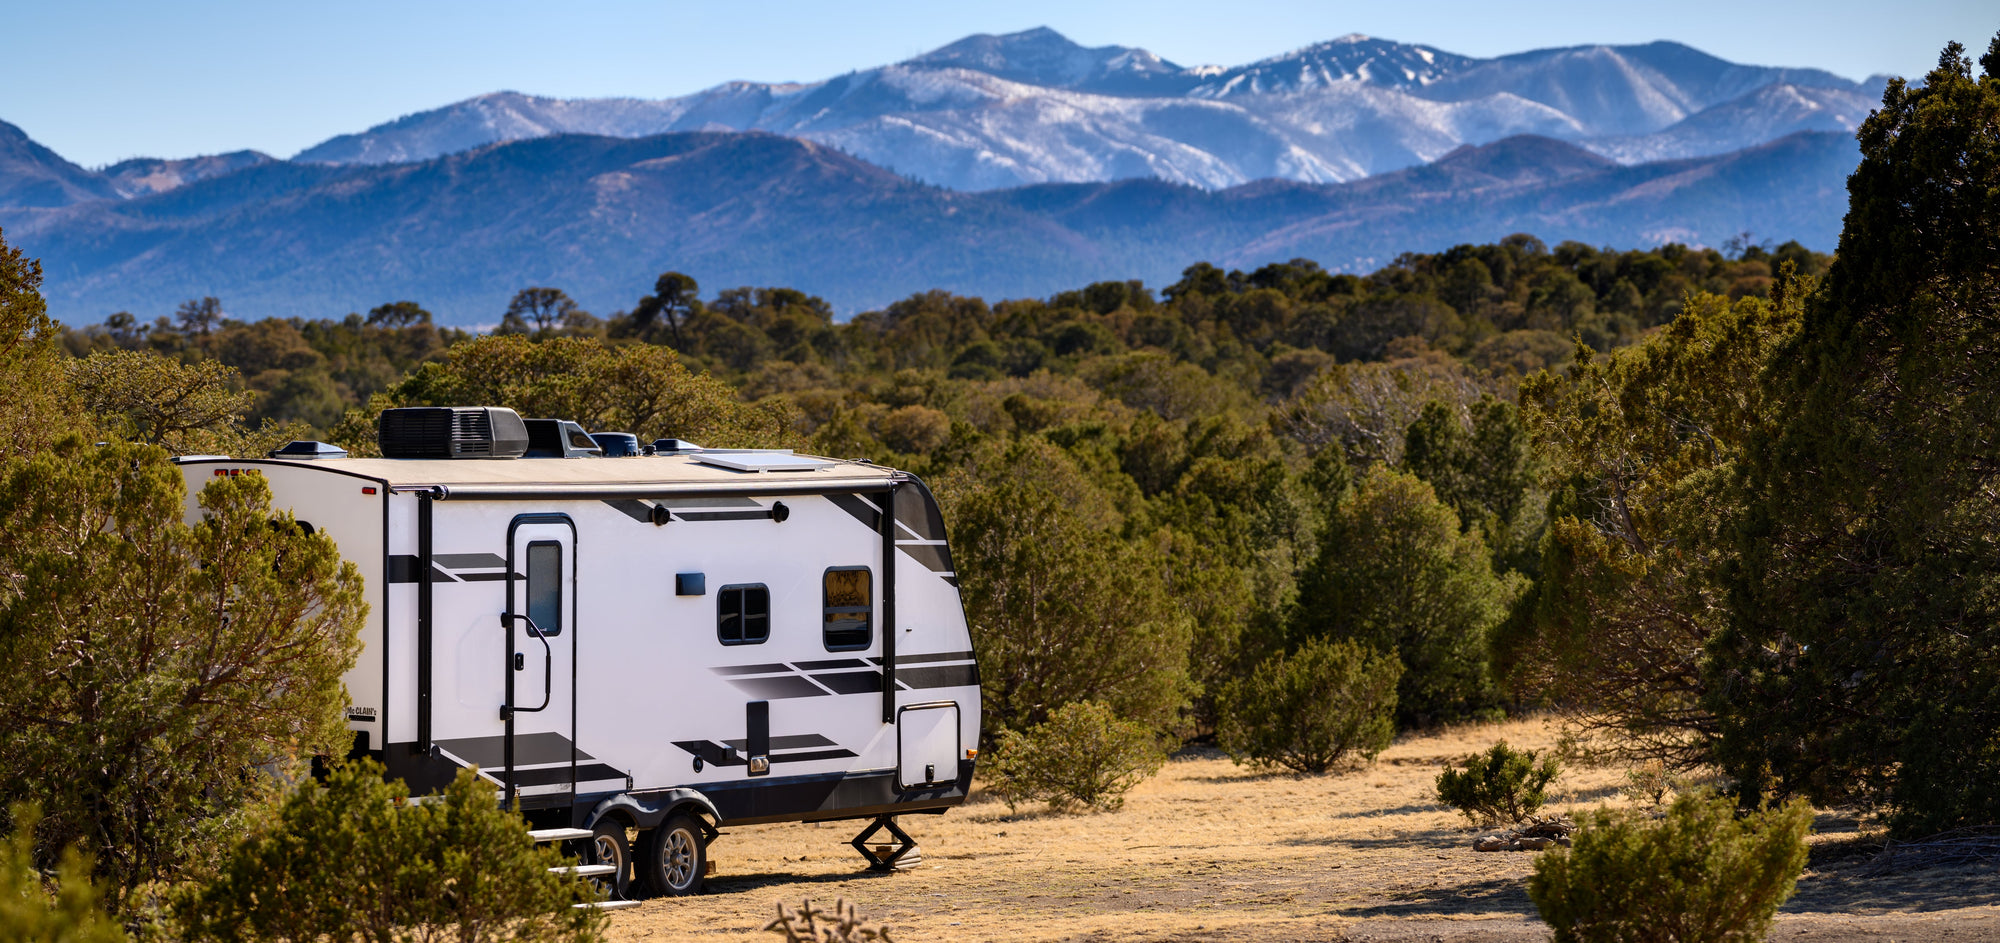 Explore the Freedom of RV Camping with Solar Generators